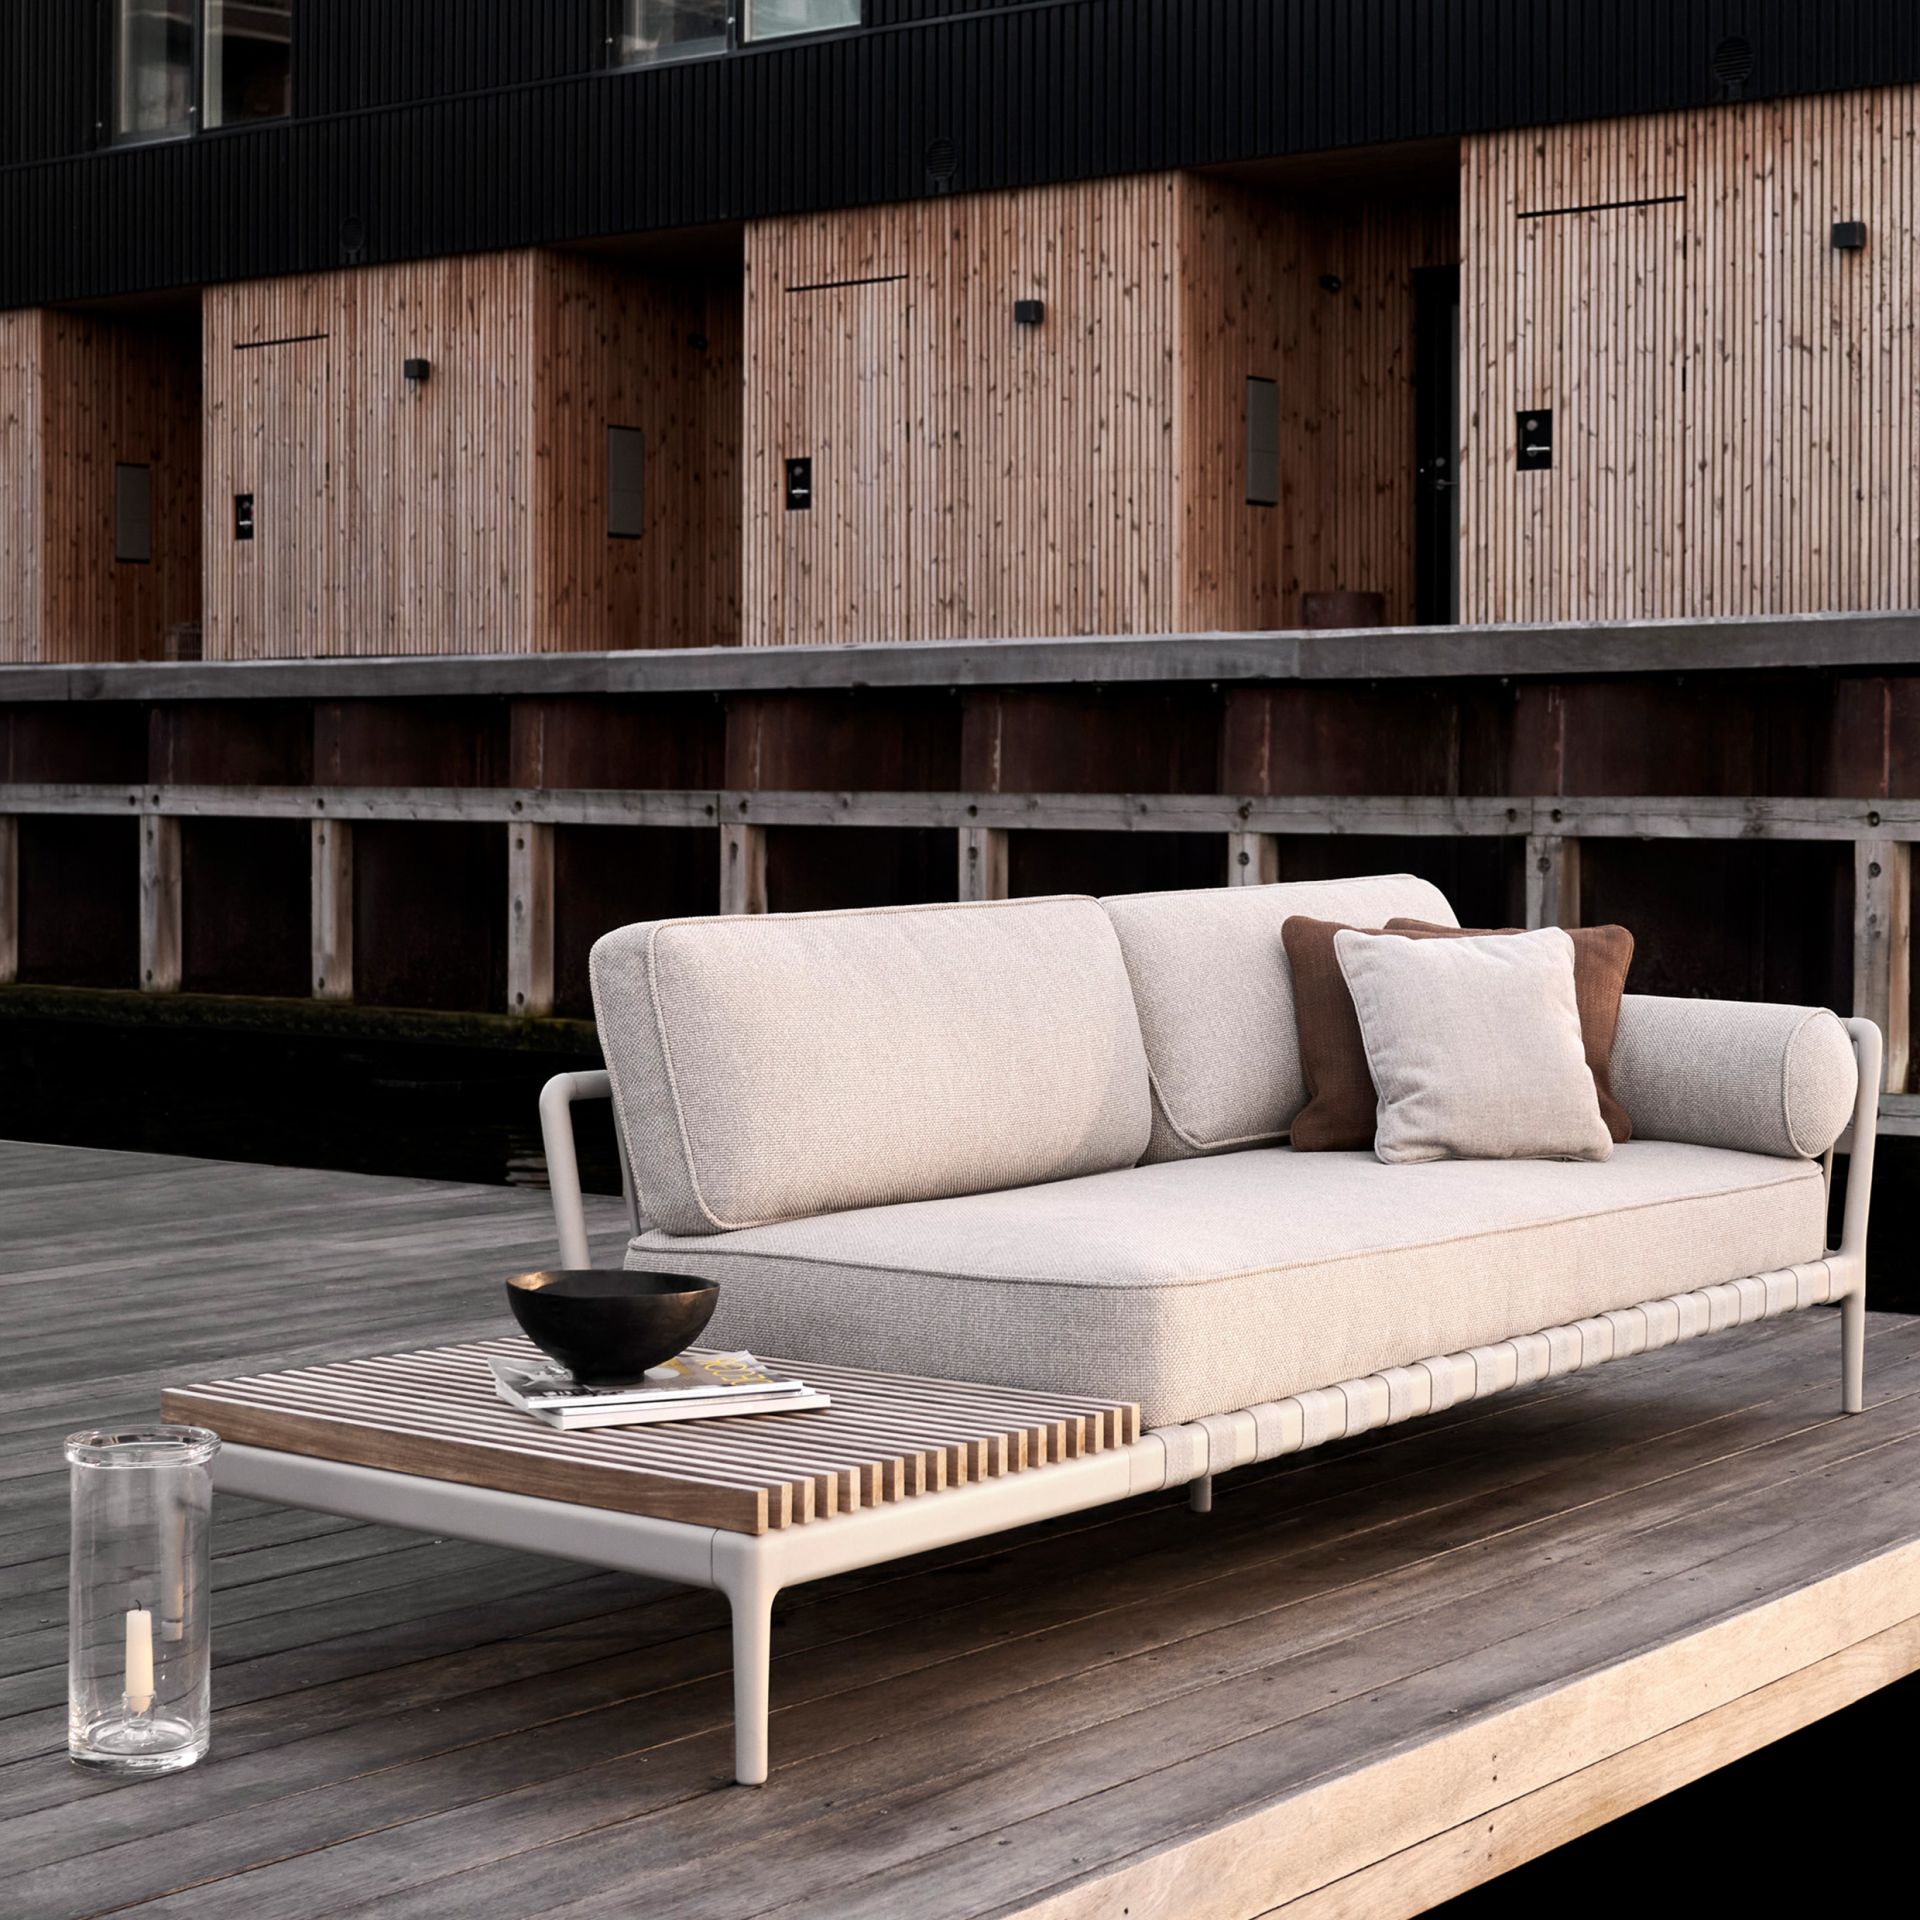 VIPP // OPEN AIR SET - LOUNGE | LARGE